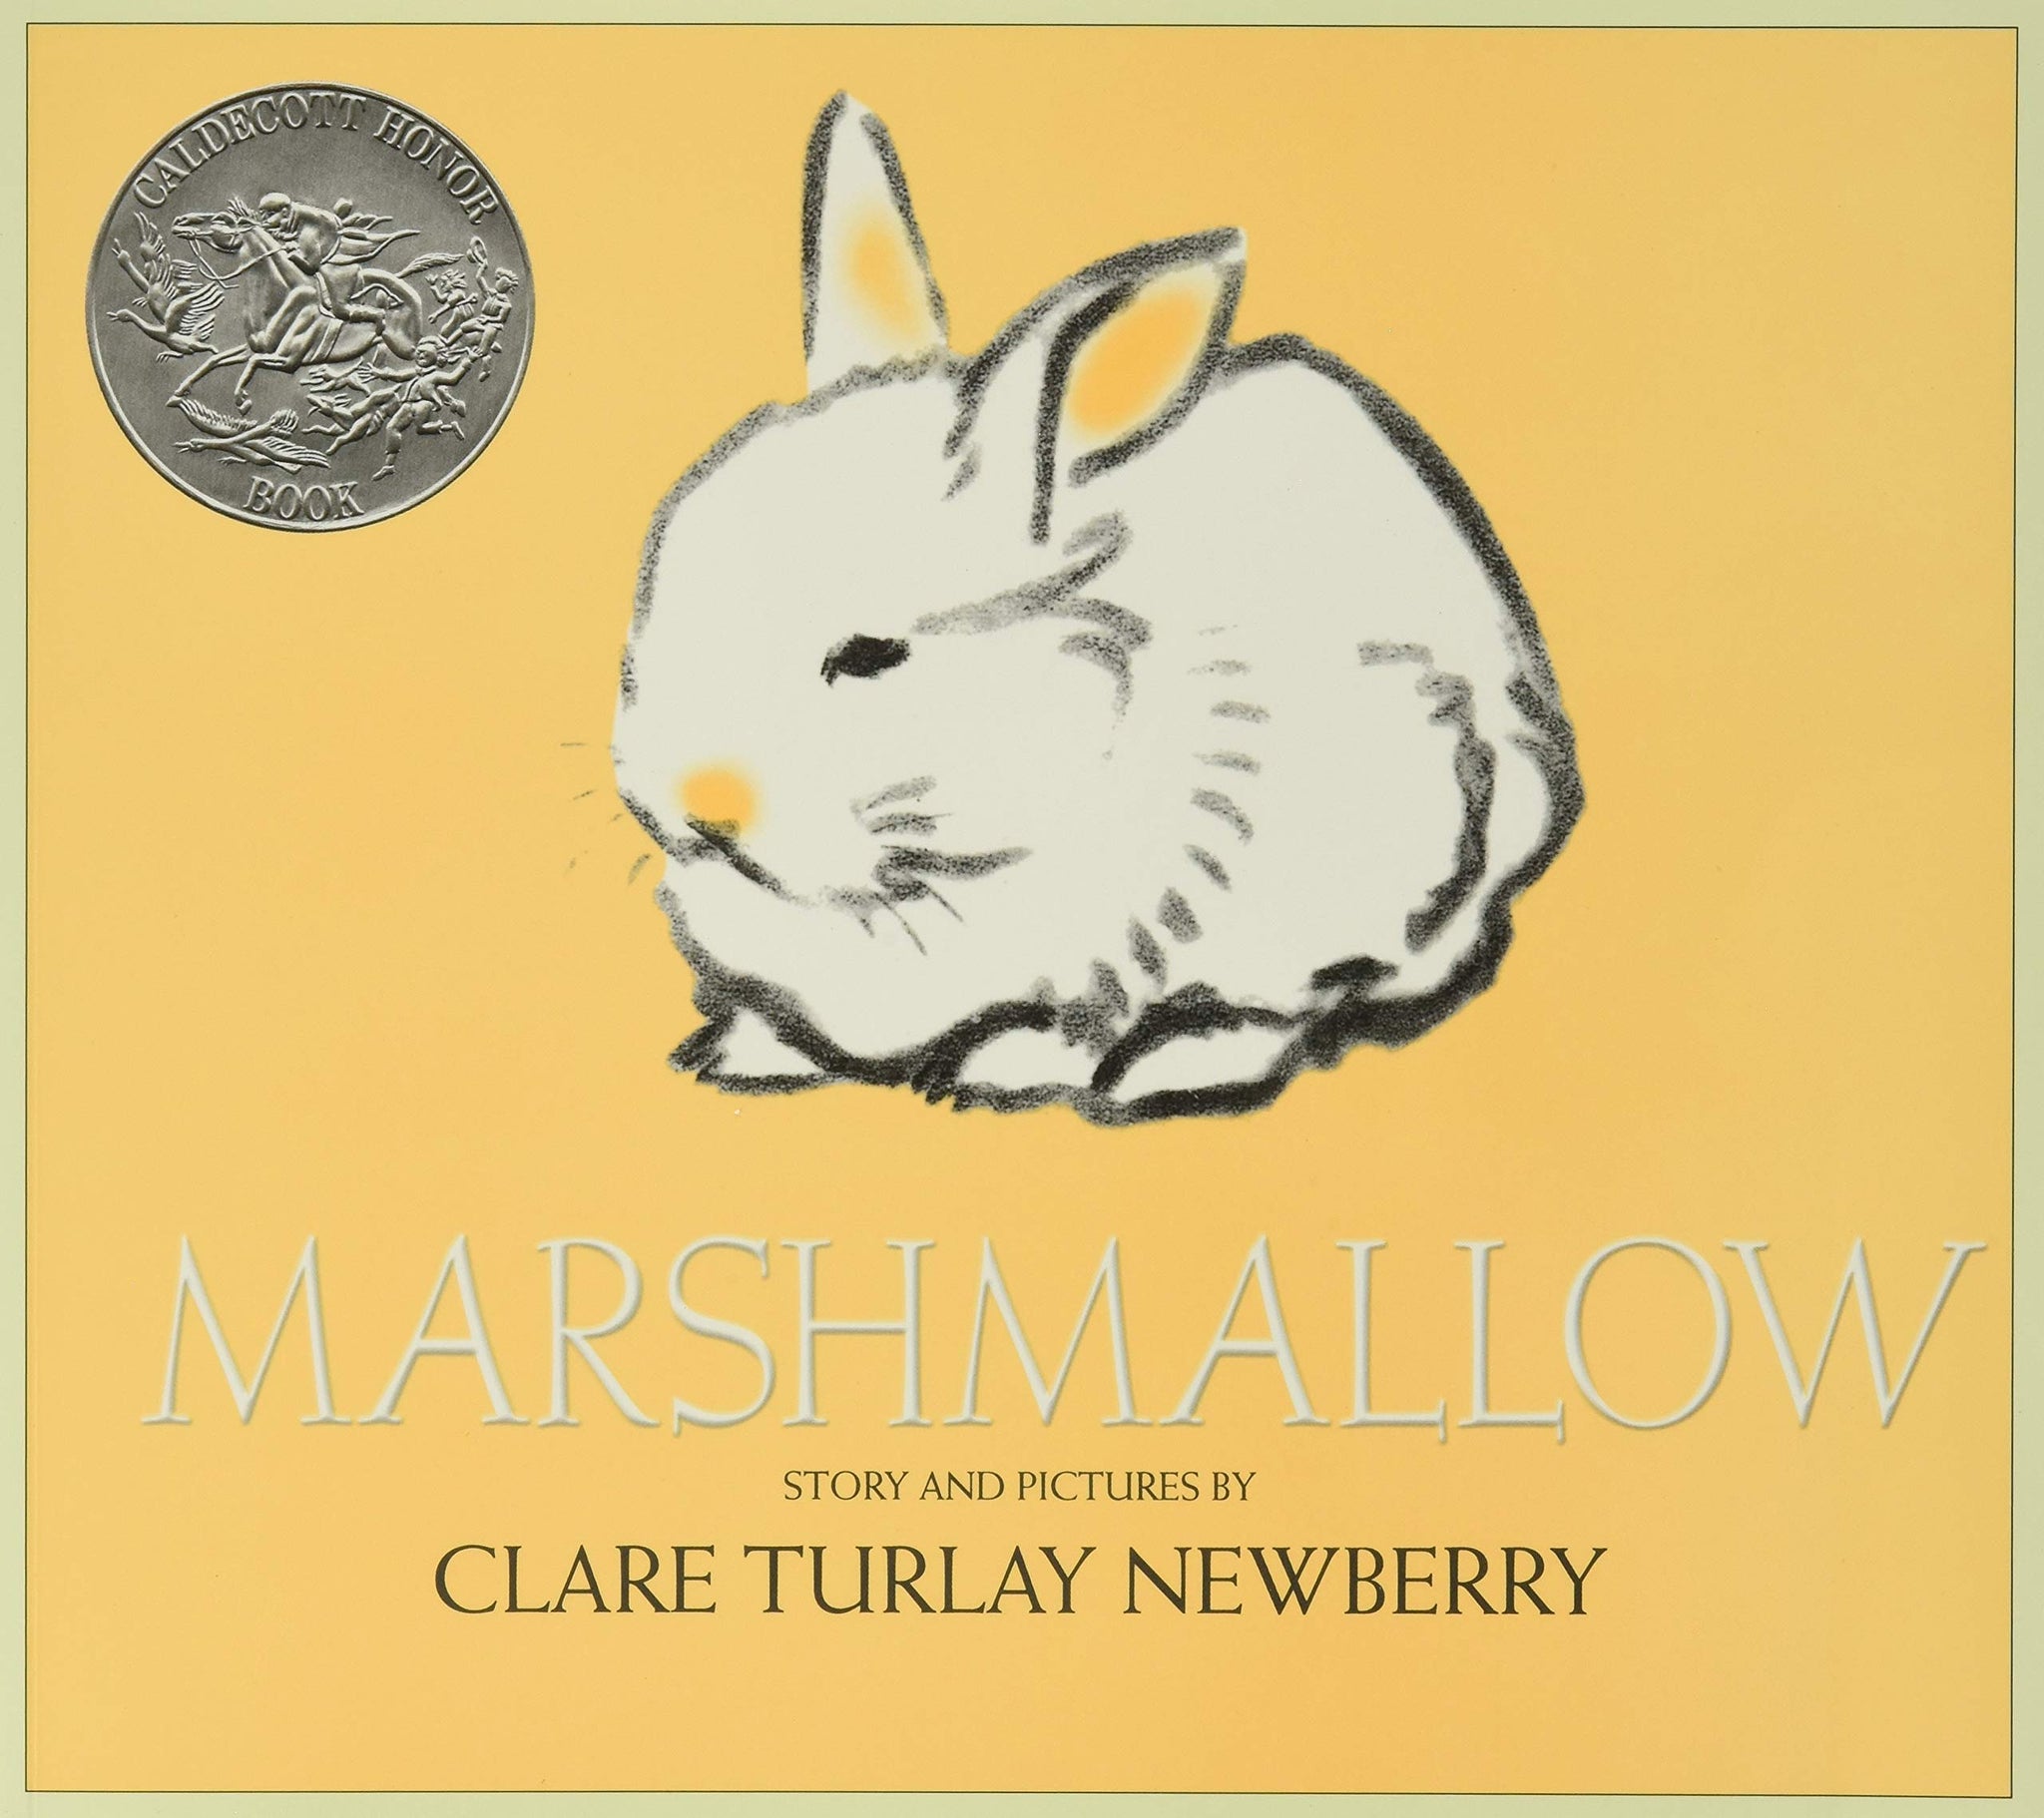 Marshmallow by Clare Turlay Newberry - tpbk